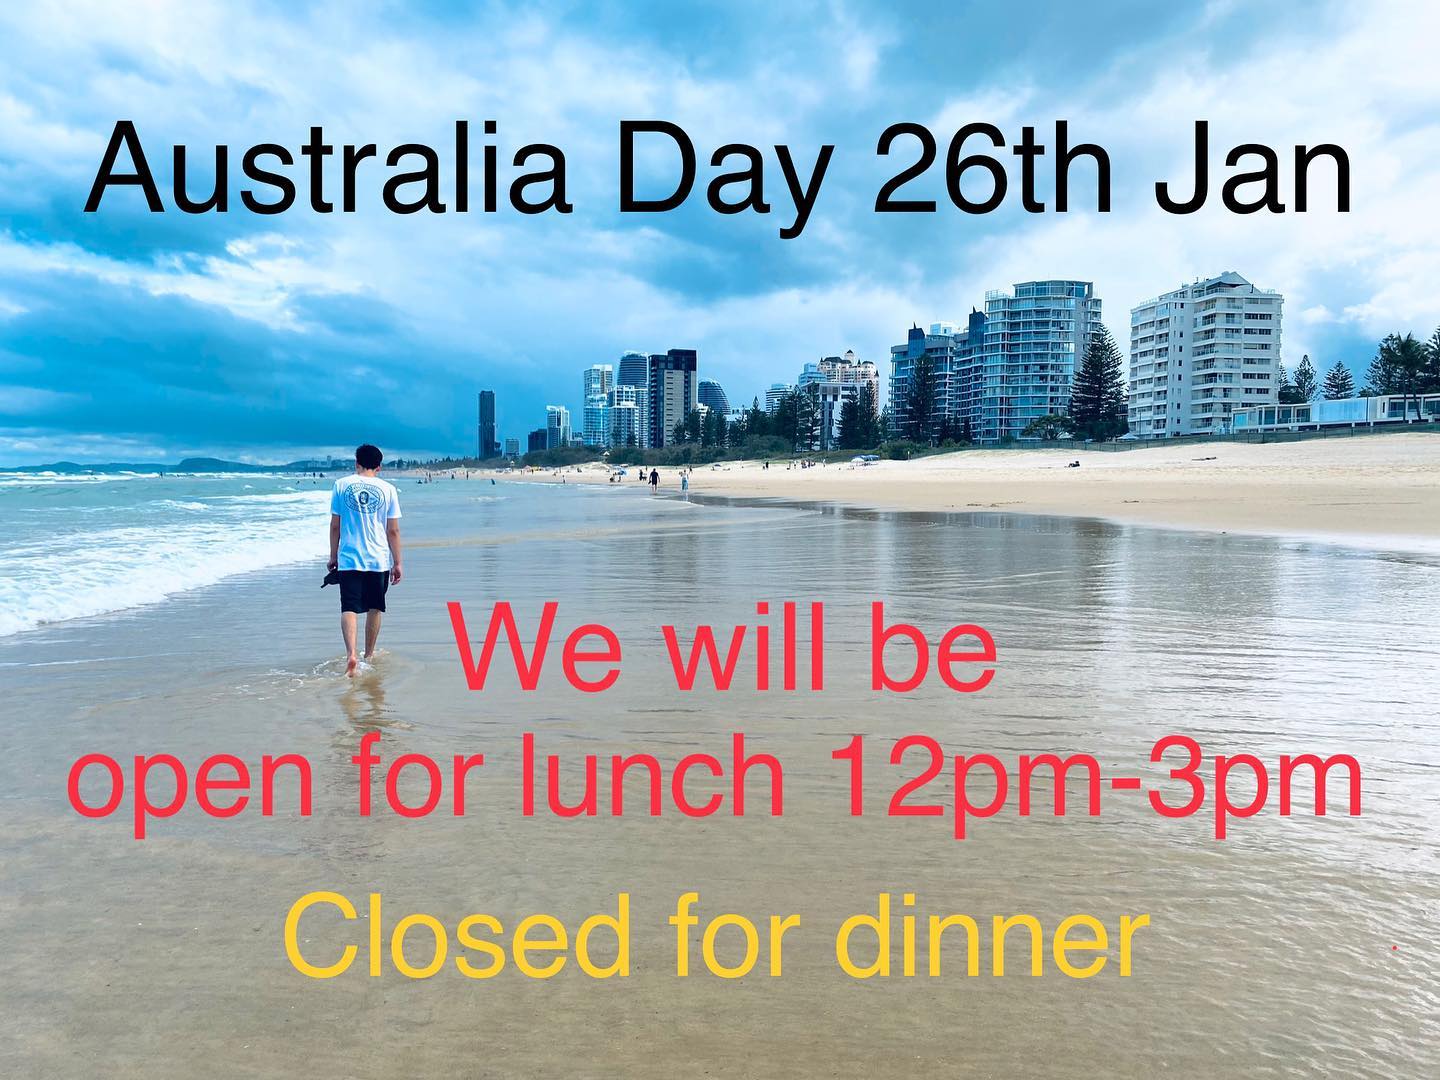 🇦🇺Australia day🐨
Open for lunch ,
Closed for dinner.
10%surcharge applies on public holiday.
Book a table online via web!!